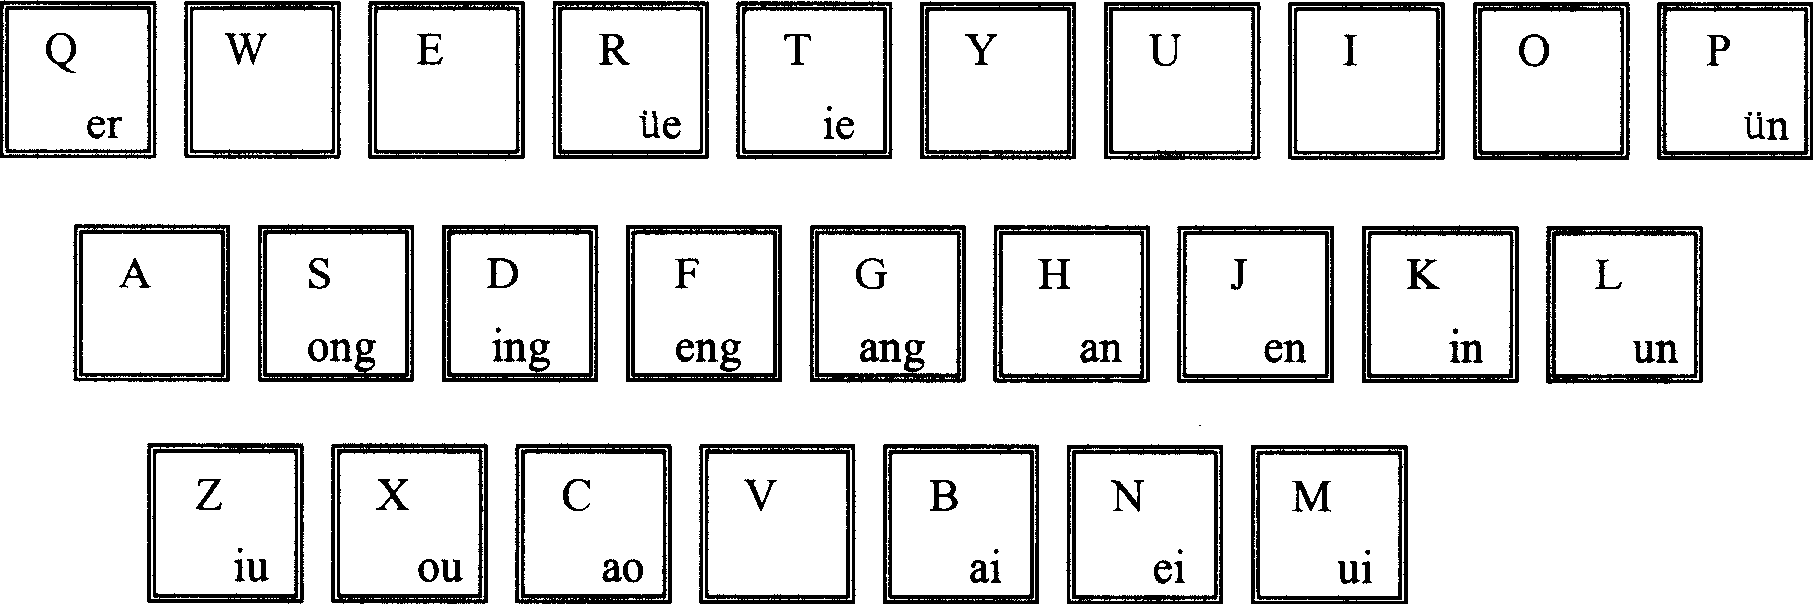 Three-spelling input method and its keyboard